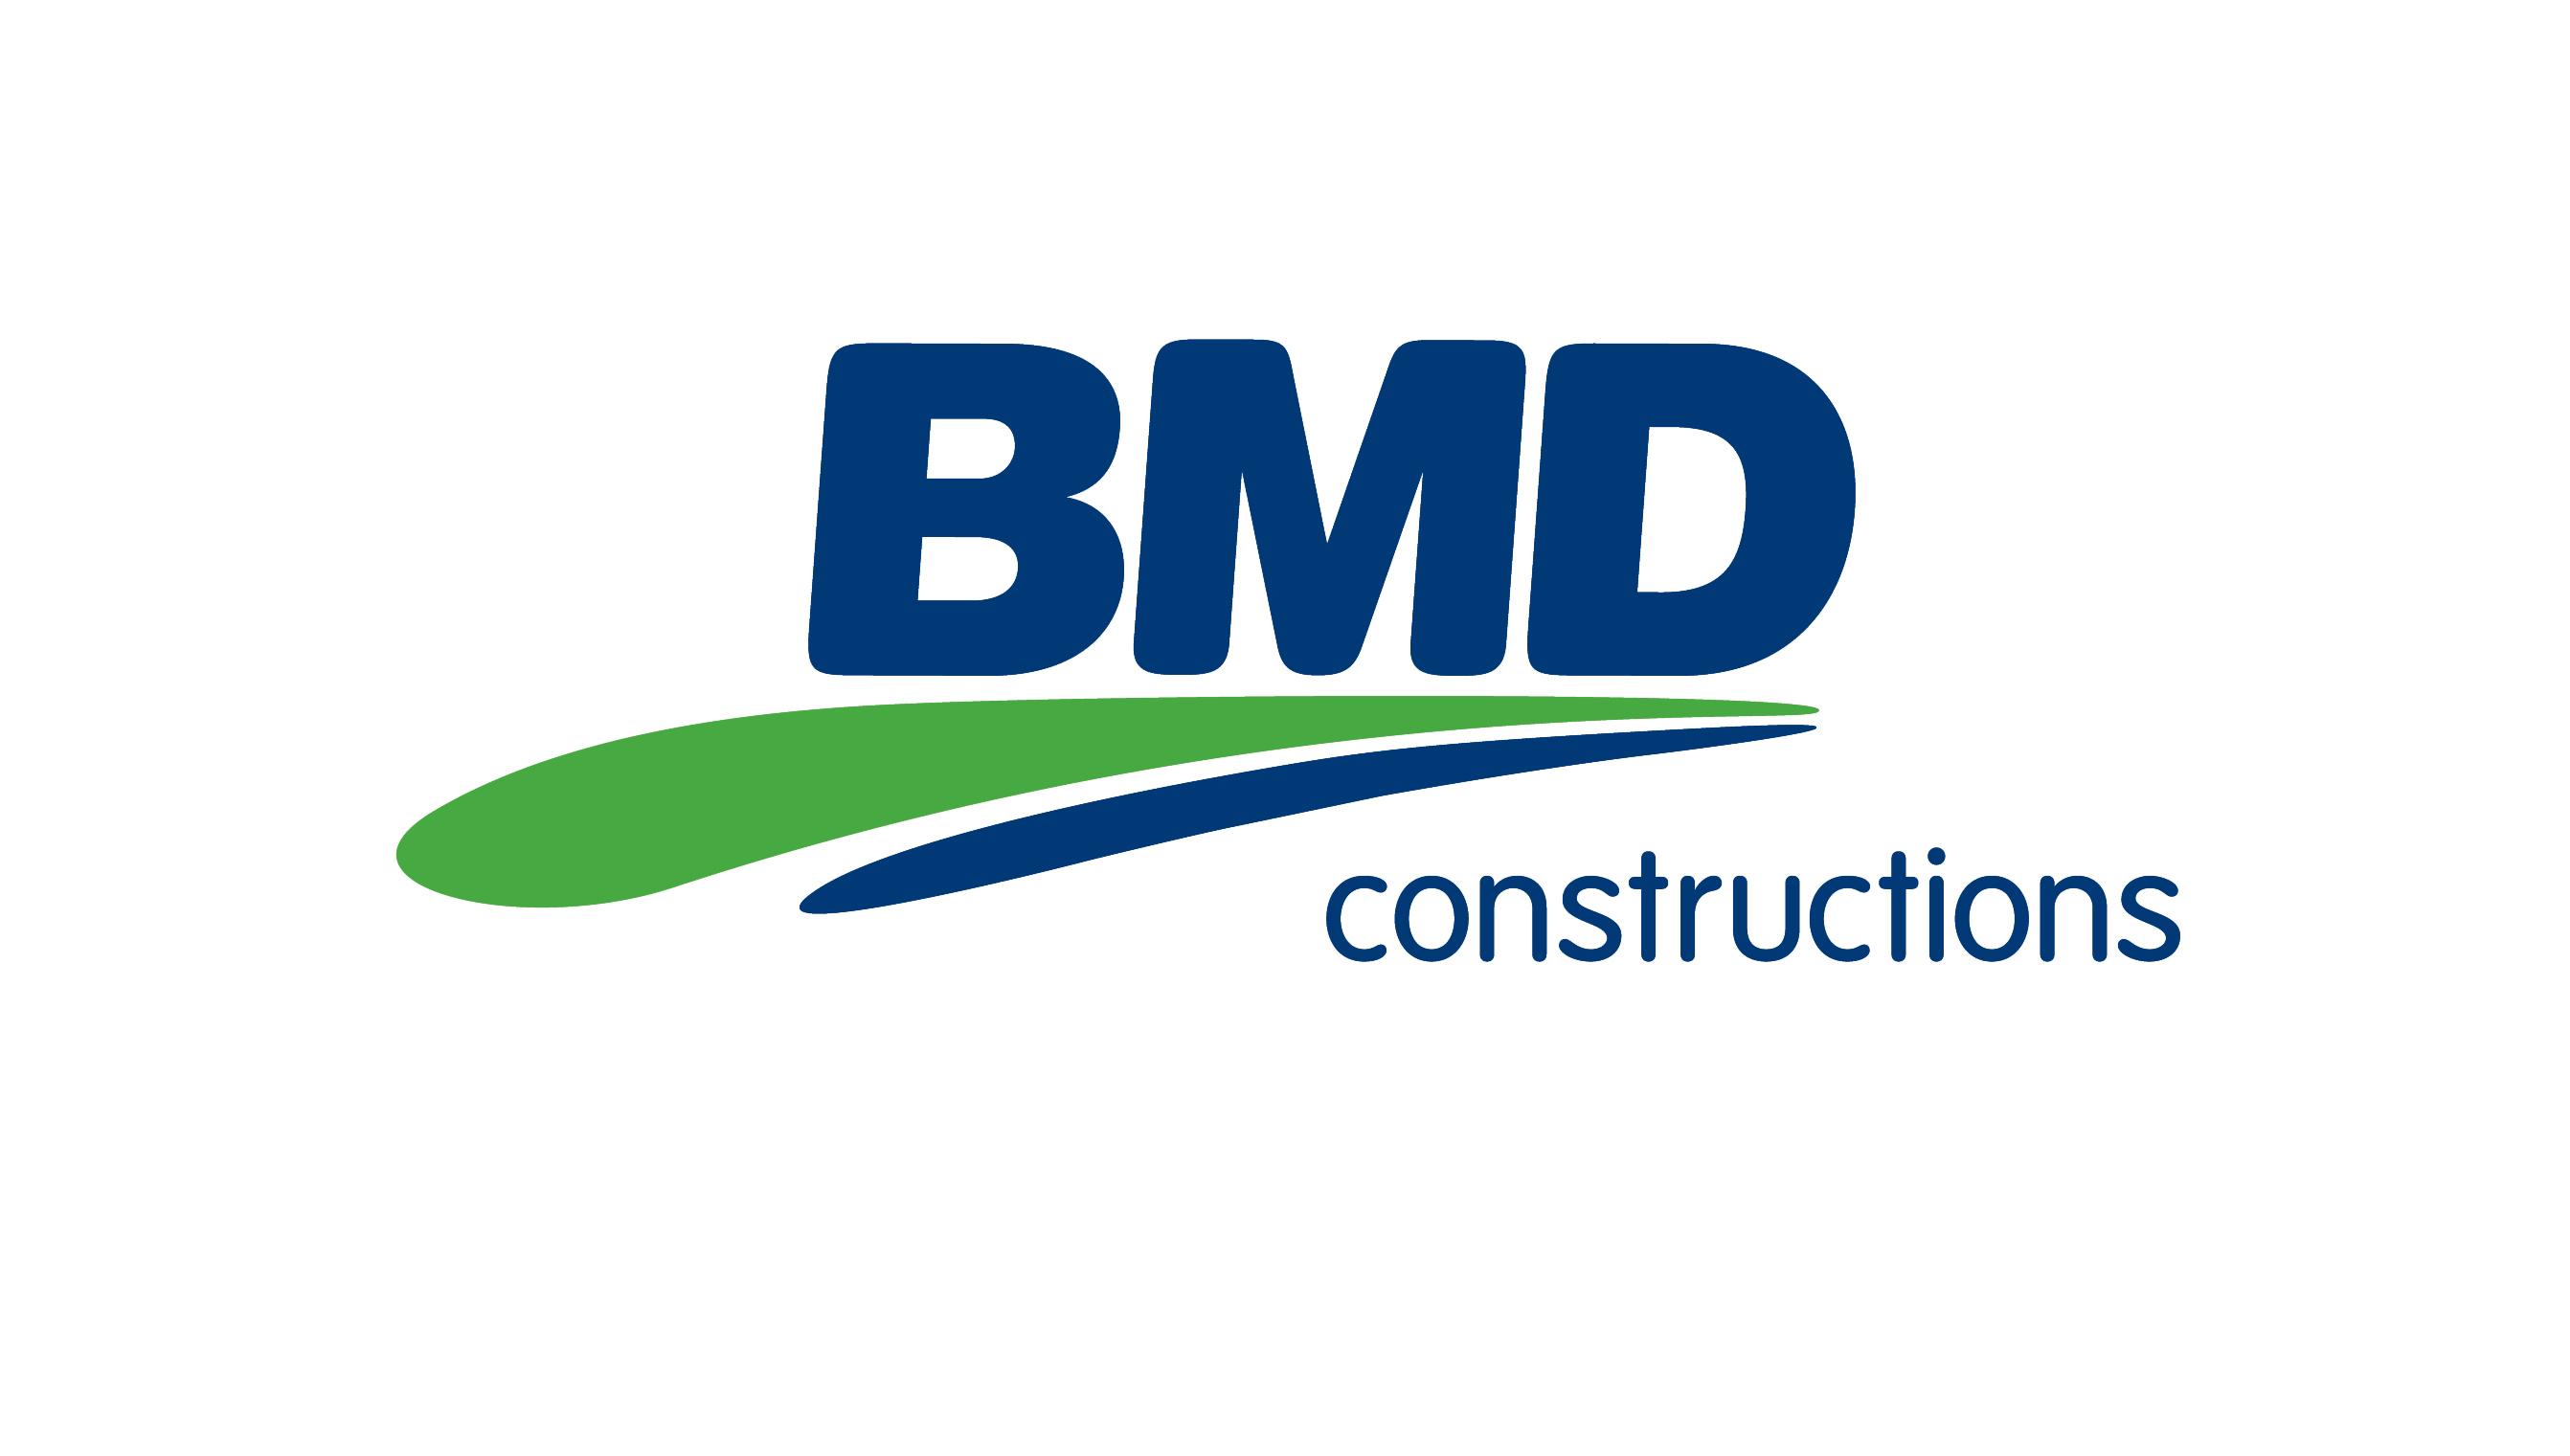 BMD Constructions